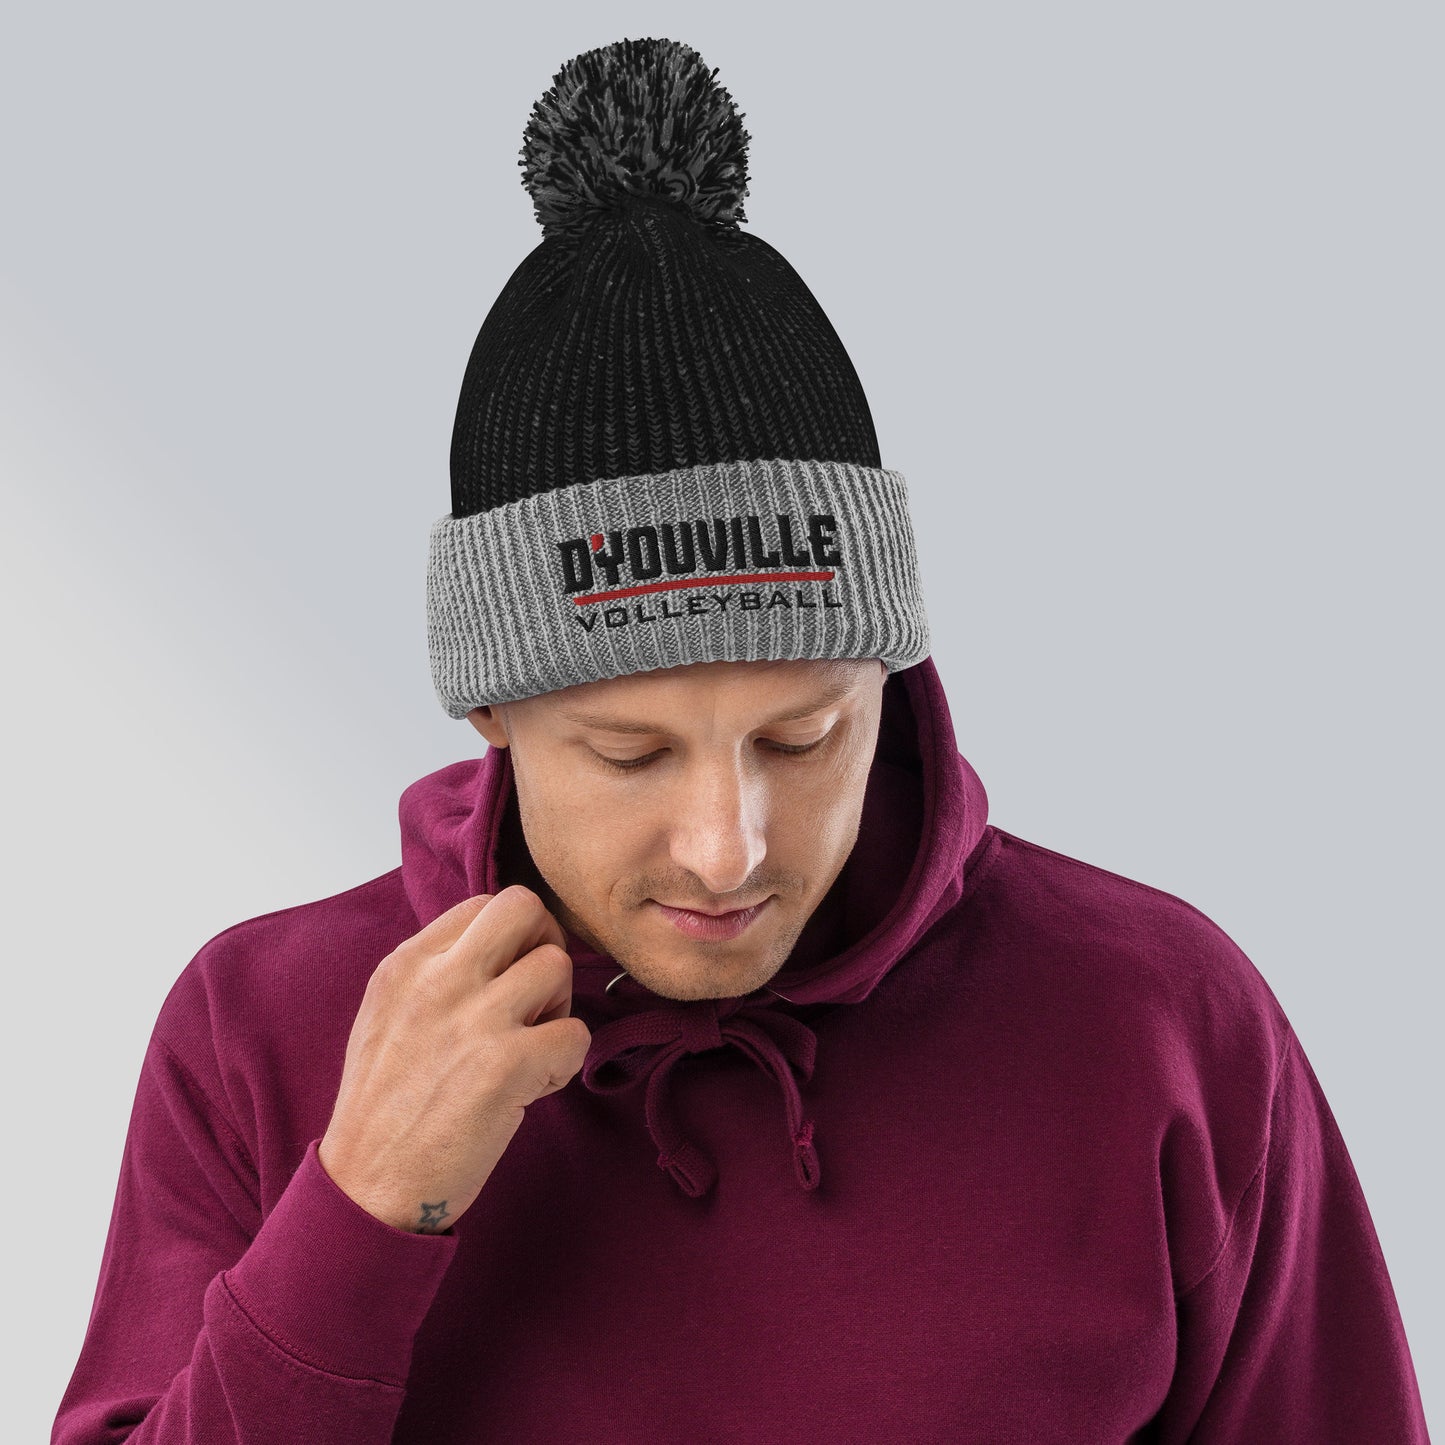 D'Youville Volleyball Pom-Pom Beanie